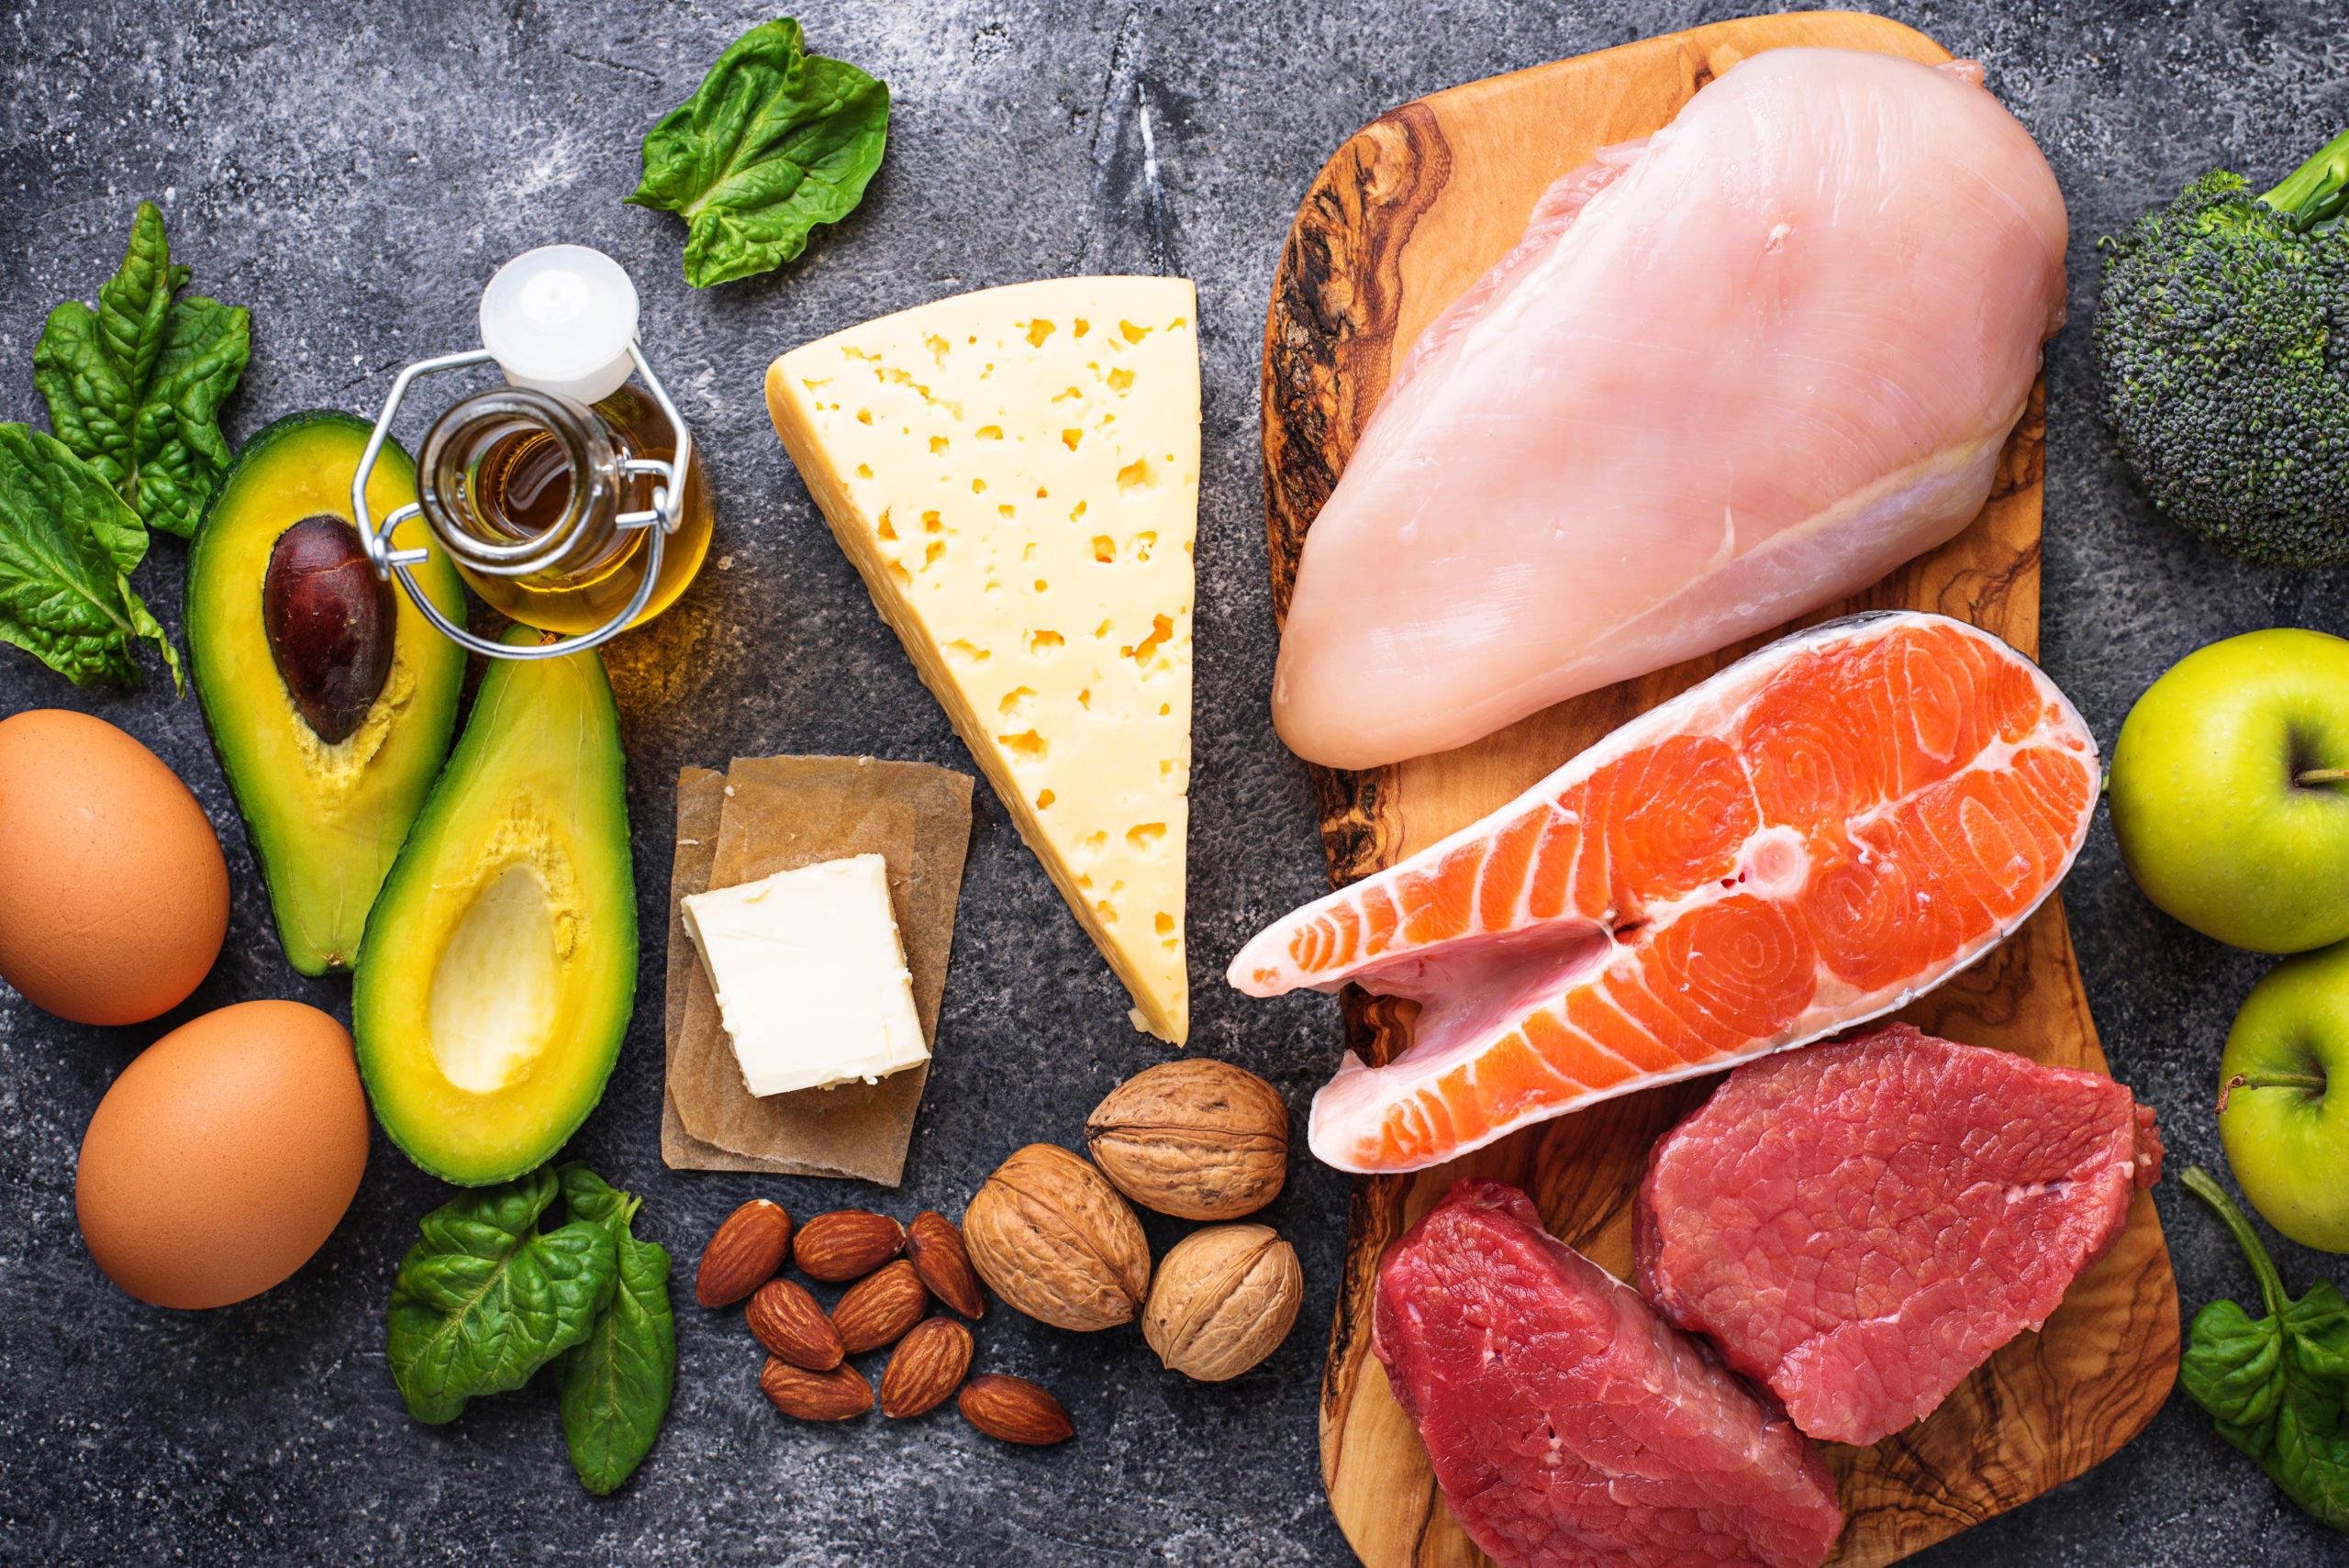 Keto Diet May Help With Sobriety